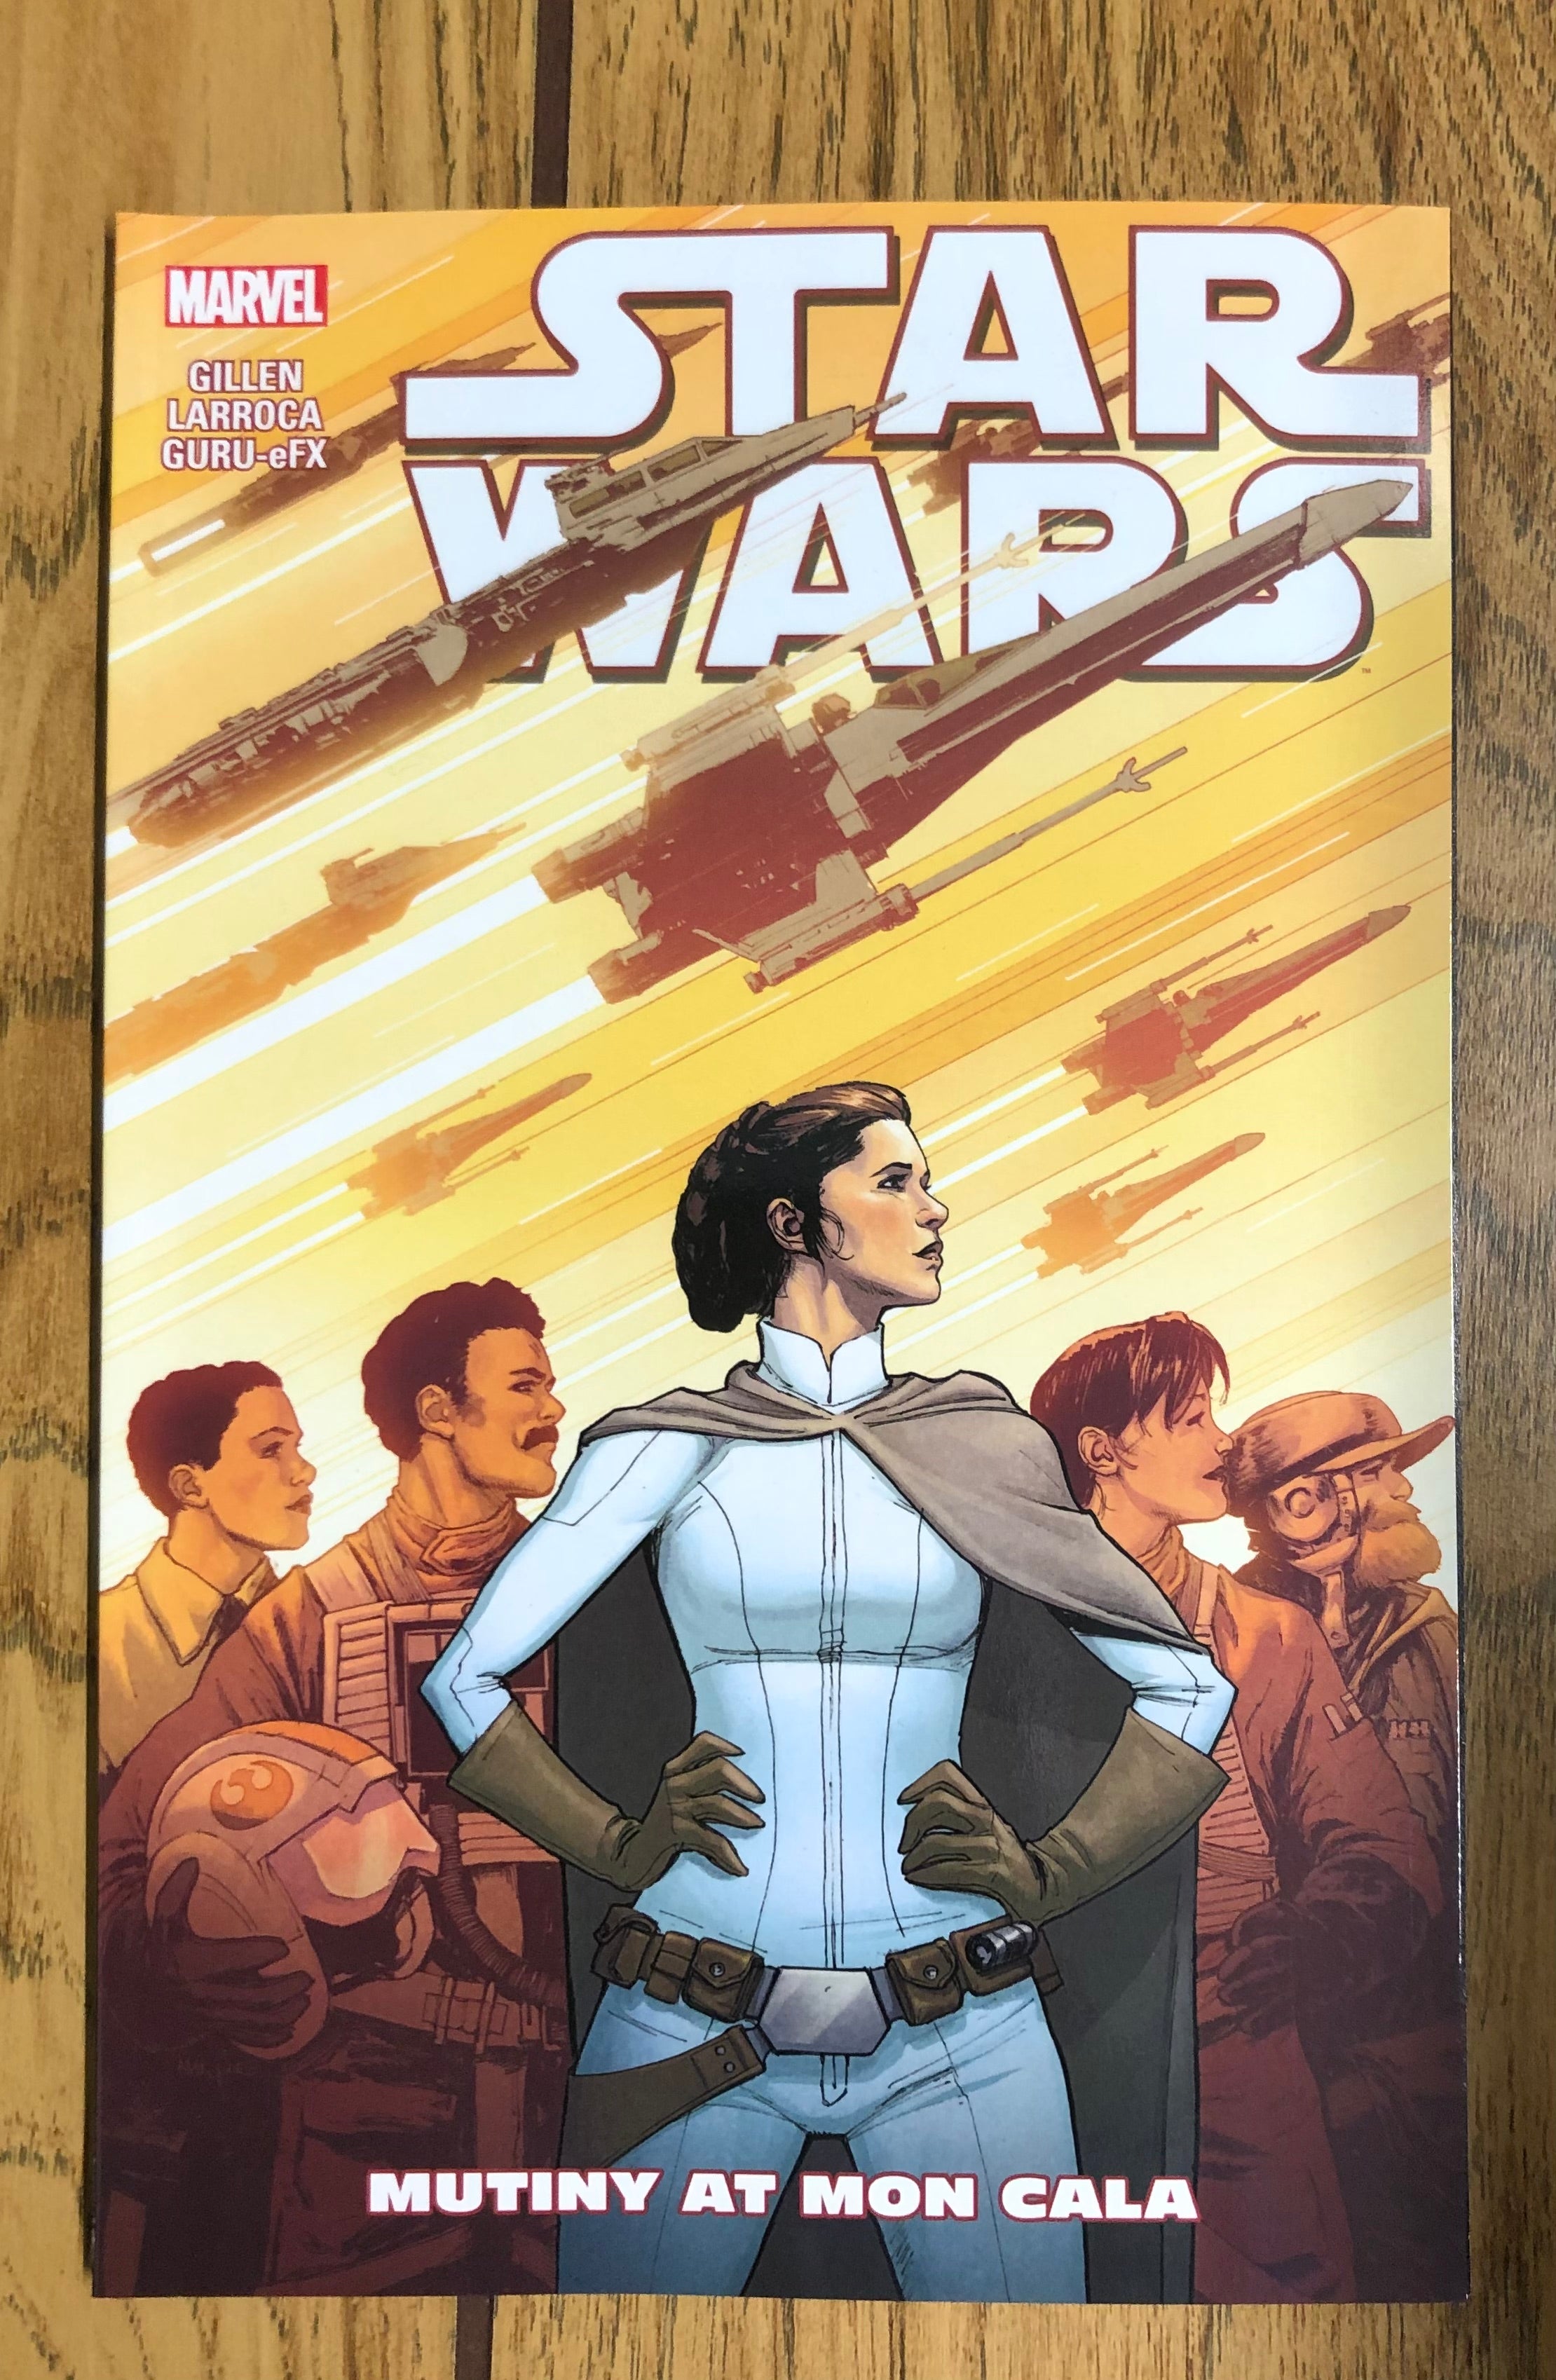 Mon　at　Star　–　Wars:　Books　and　Mutiny　Cala　Lucky's　vol.8　Comics